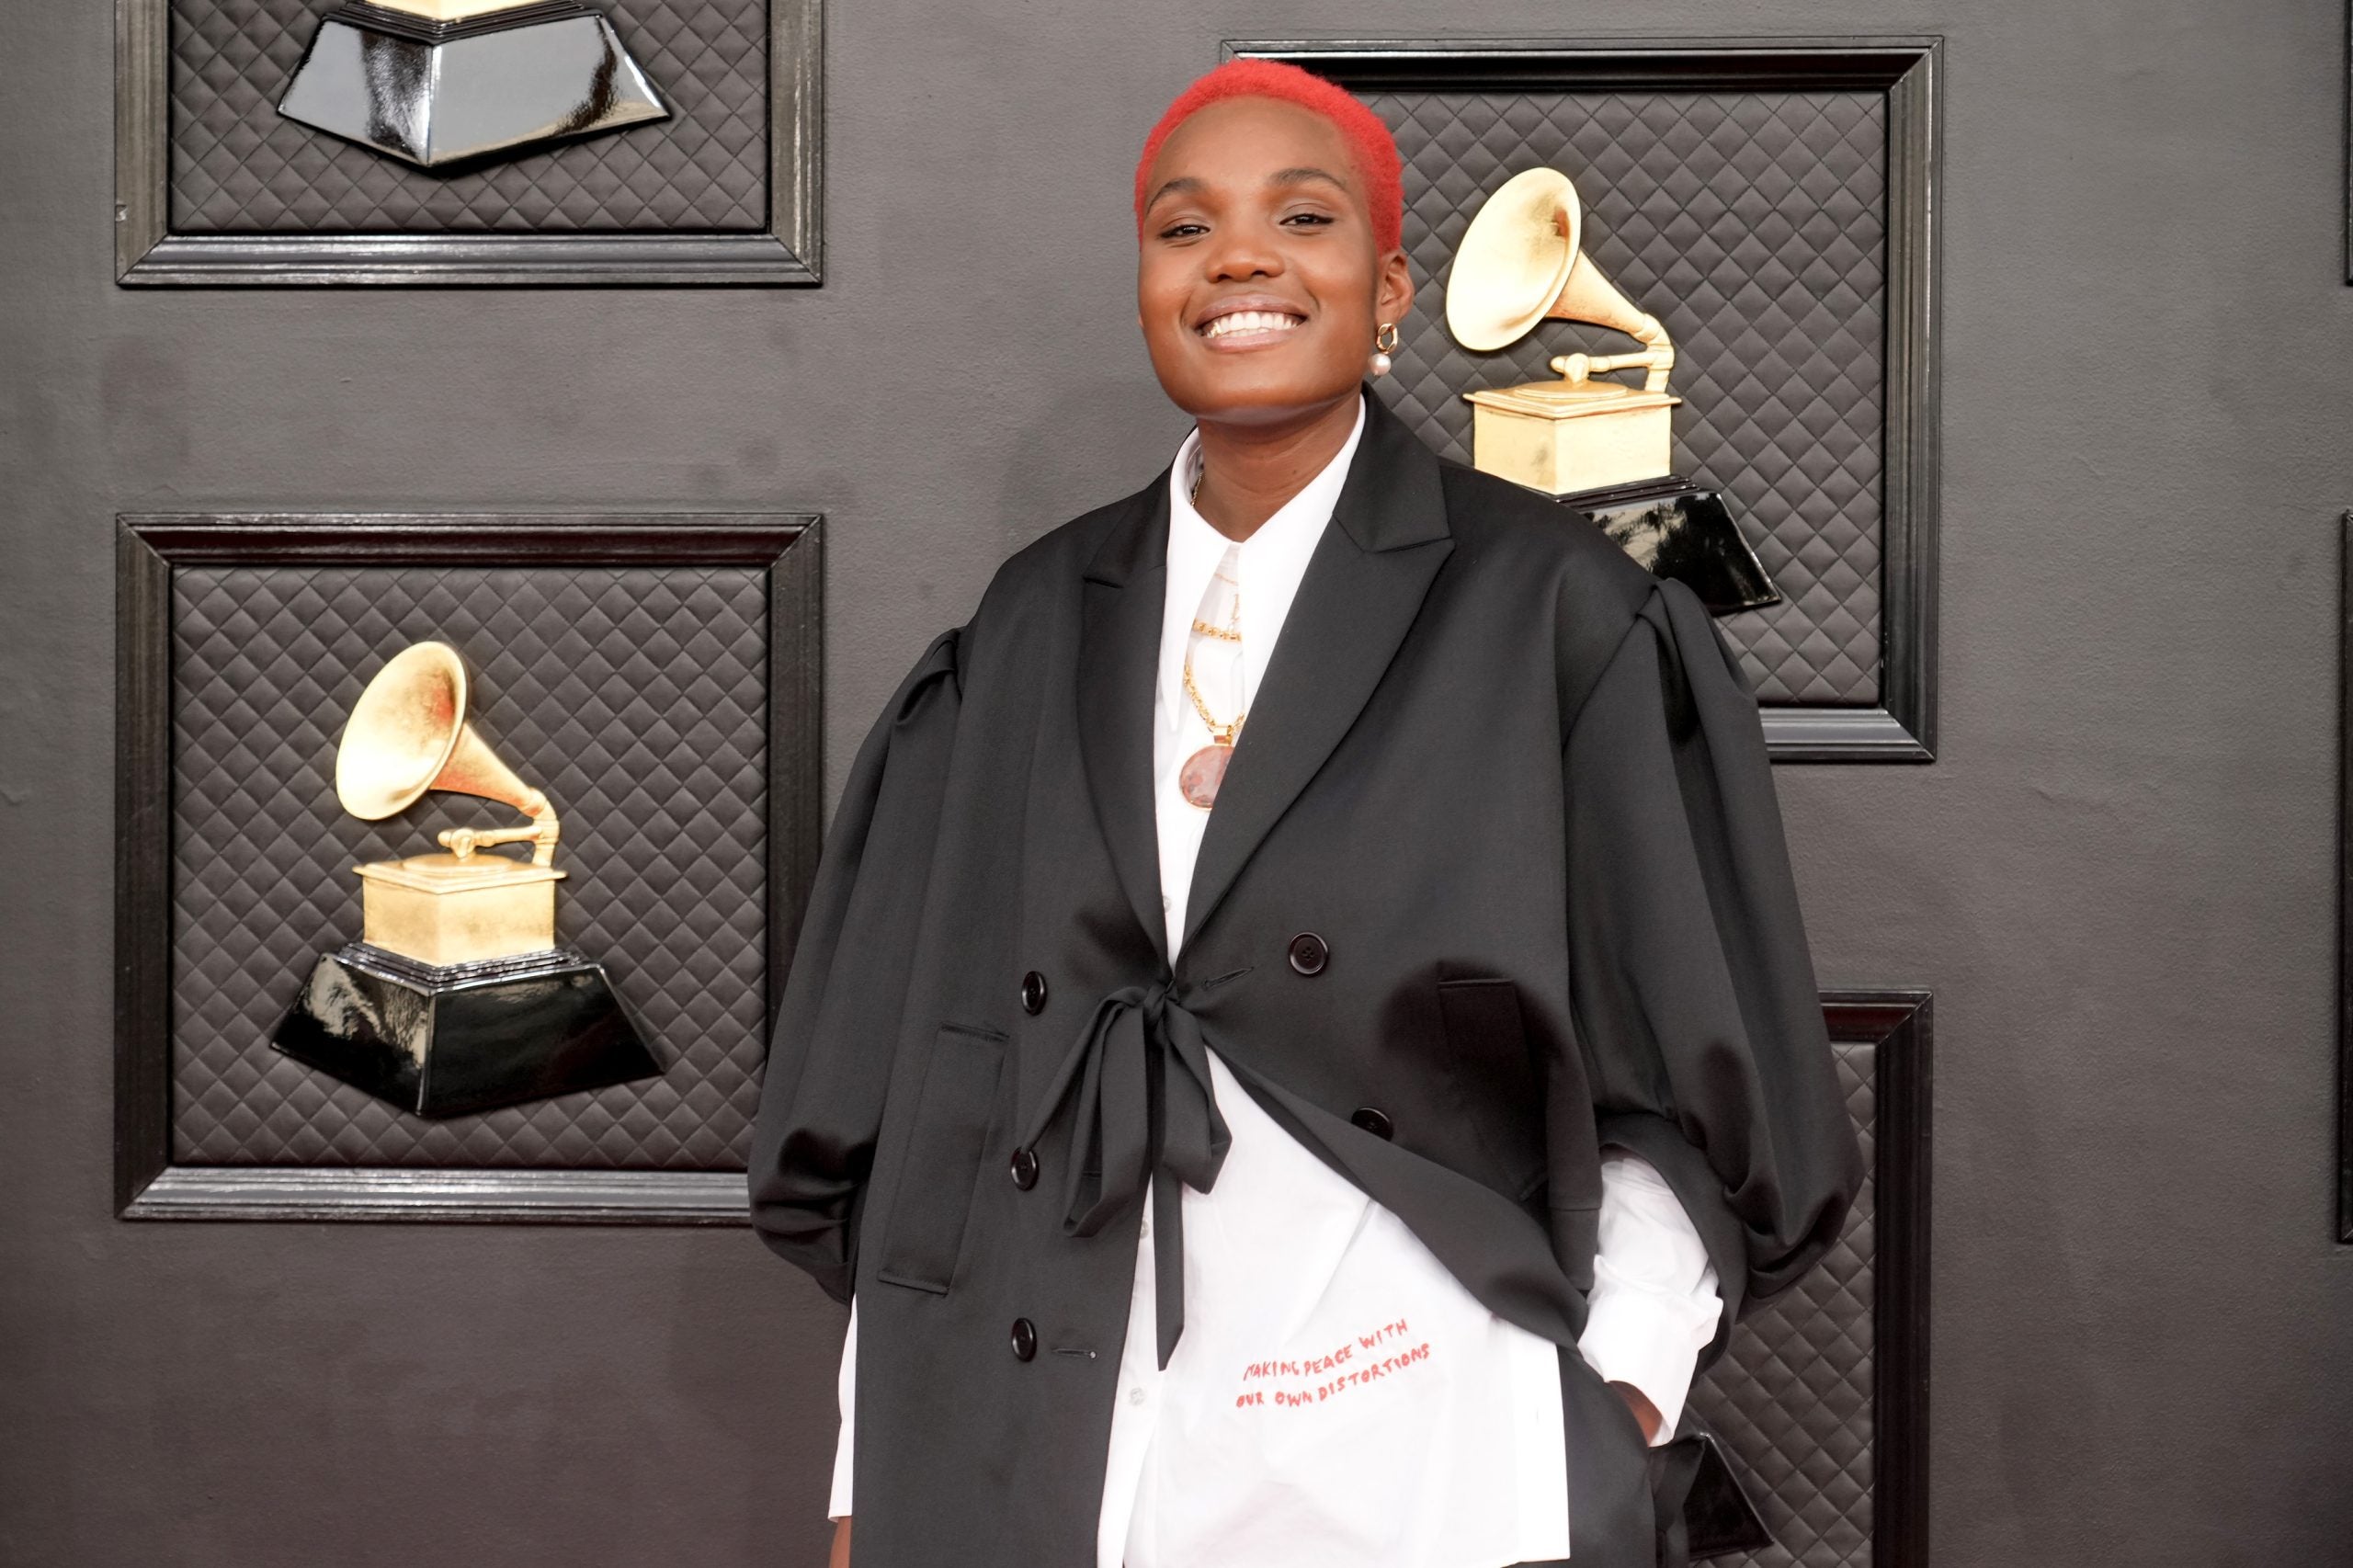 Behold, The Boldest Hair Colors Seen At The 2022 Grammys